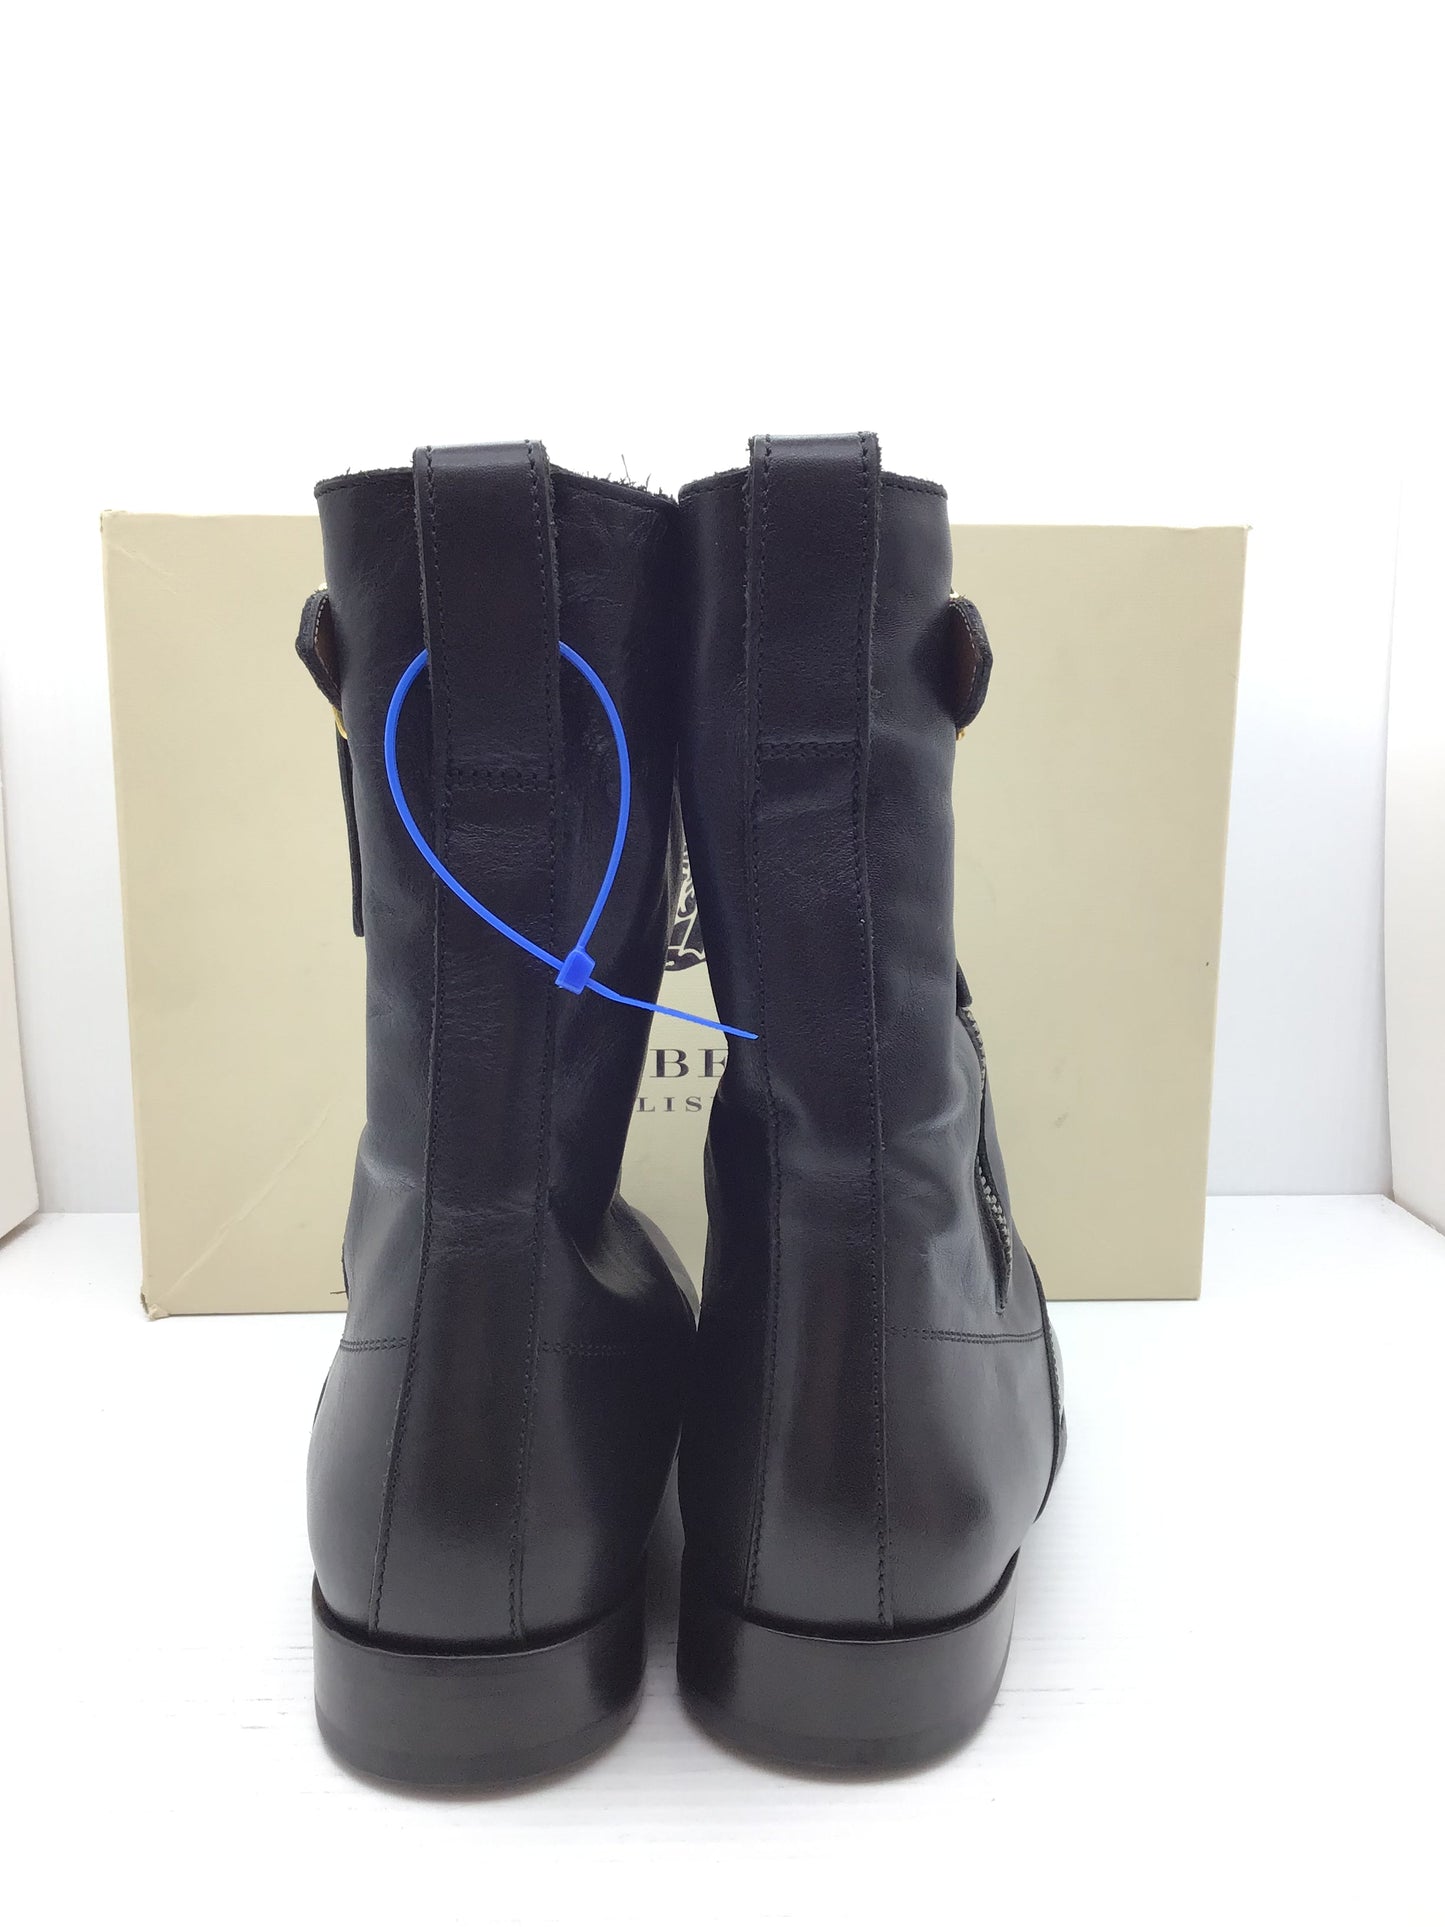 Boots Designer By Burberry  Size: 10